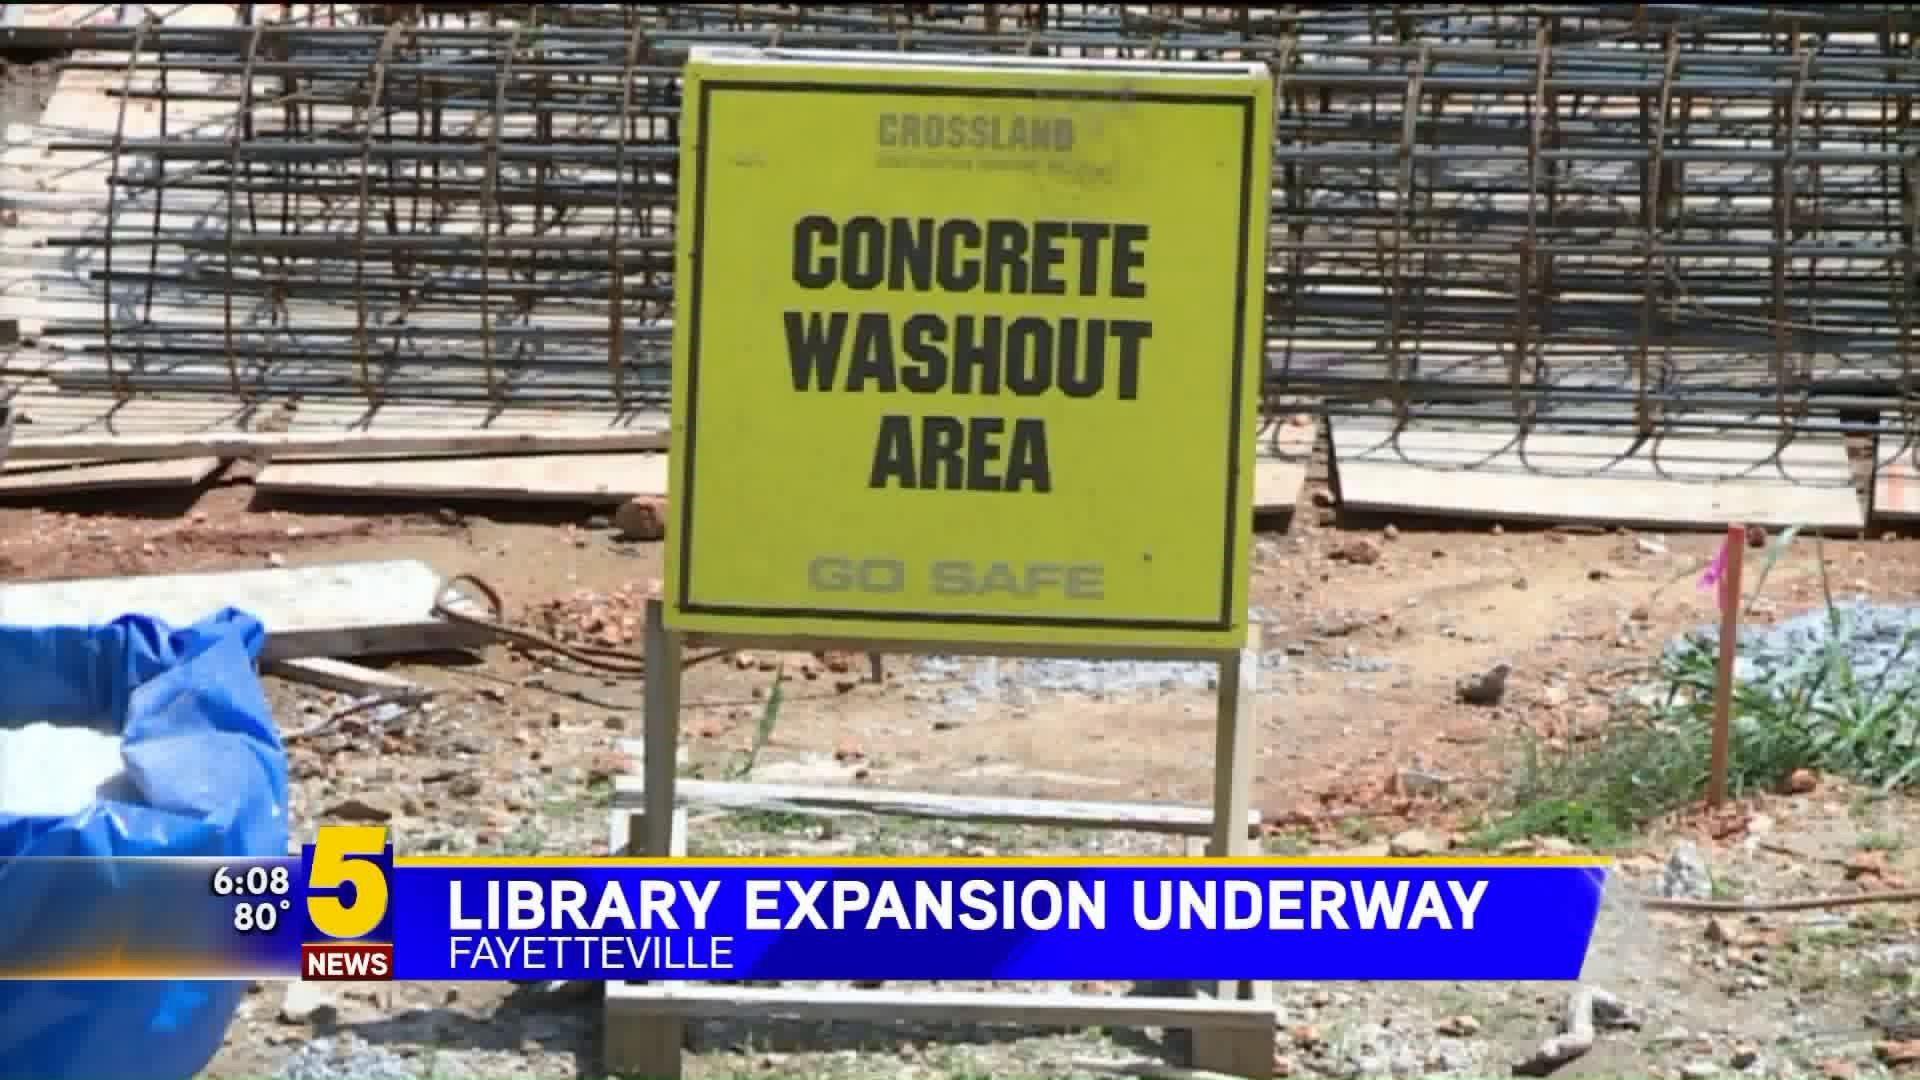 Fayetteville Library Expansion Underway